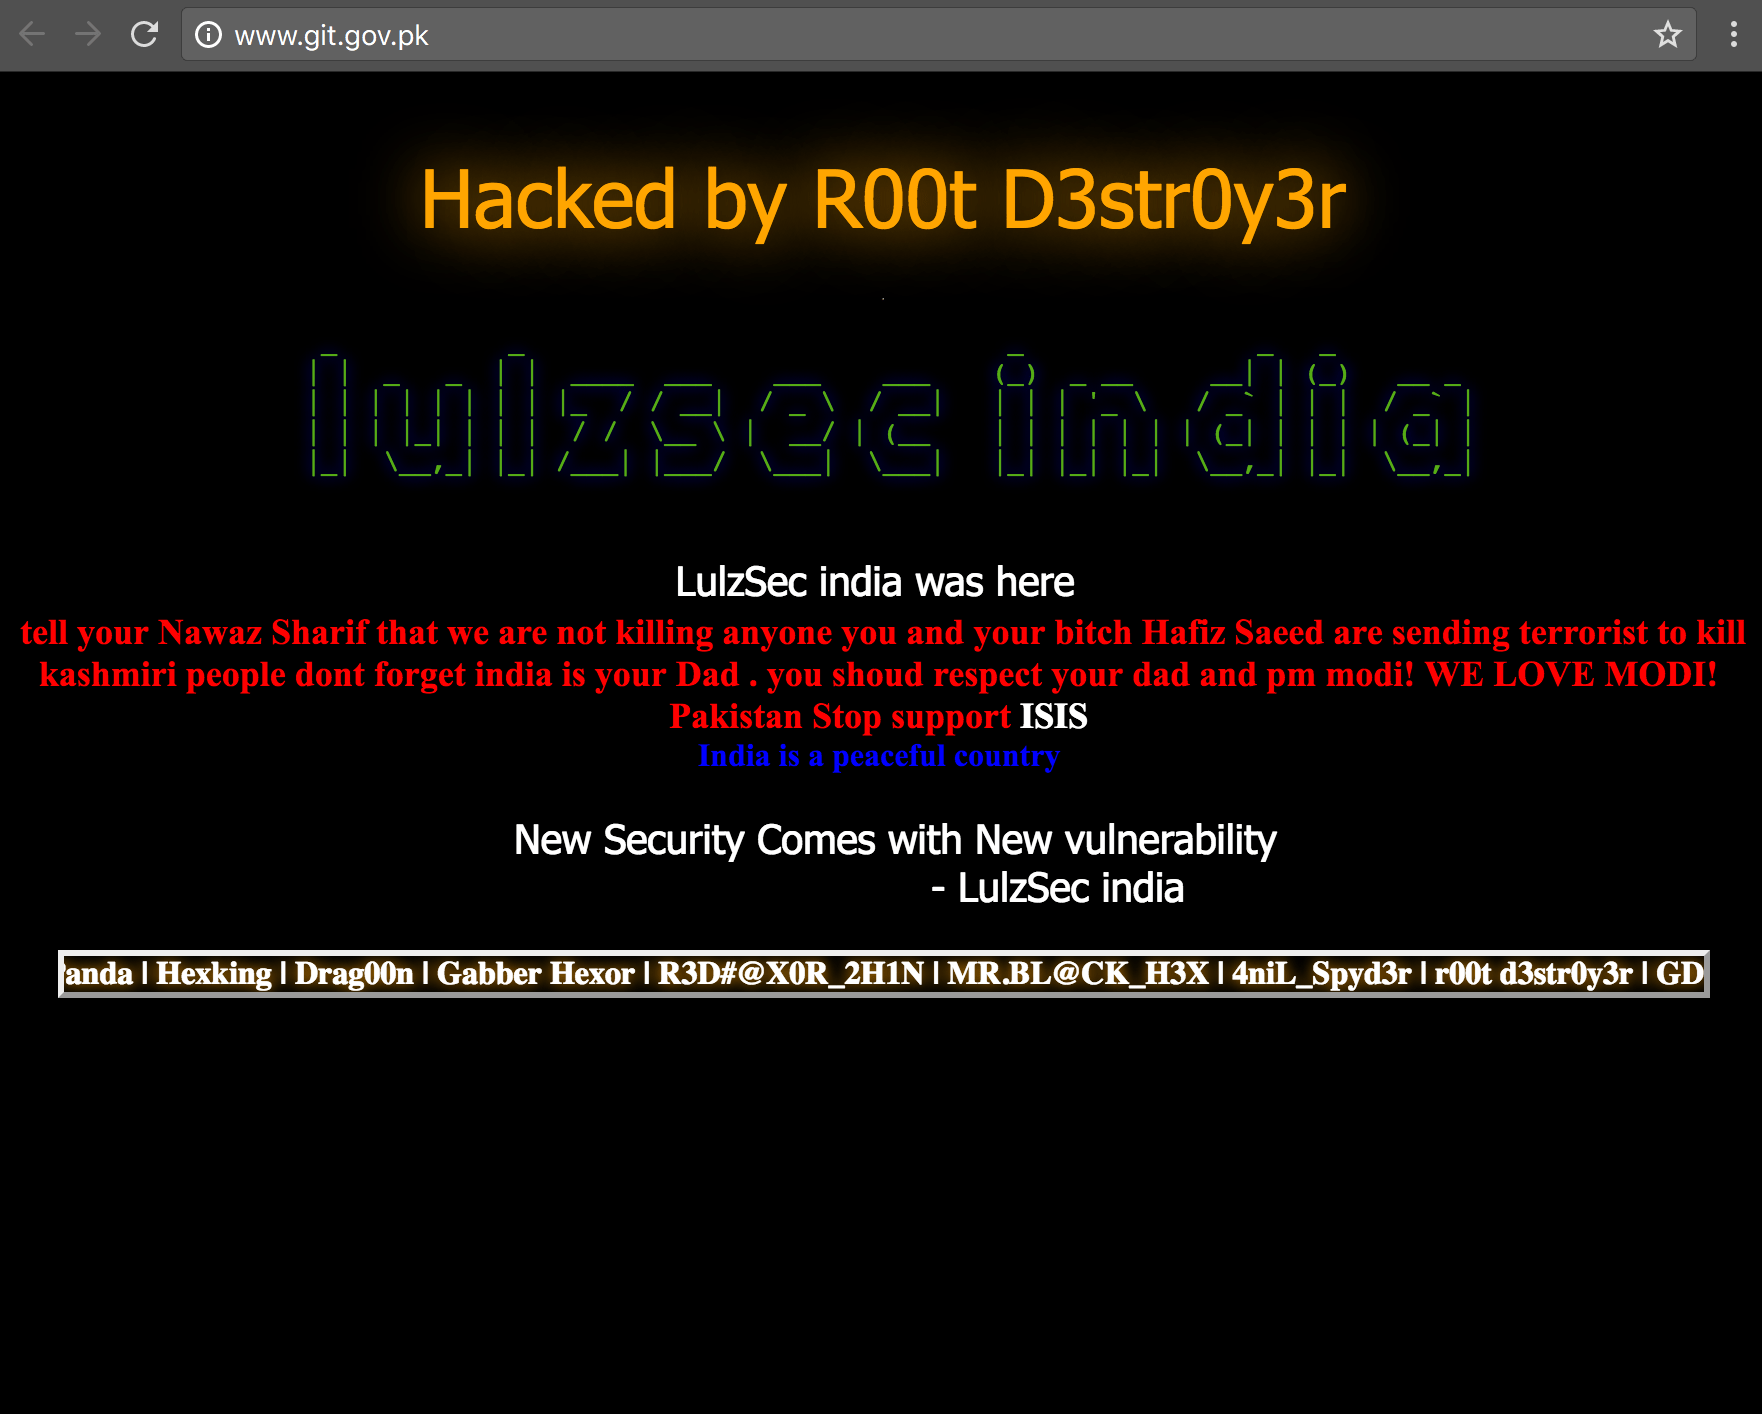 Screenshot of the attacked website, www.git.gov.pk defaced by the hacker r00t d3str0y3r